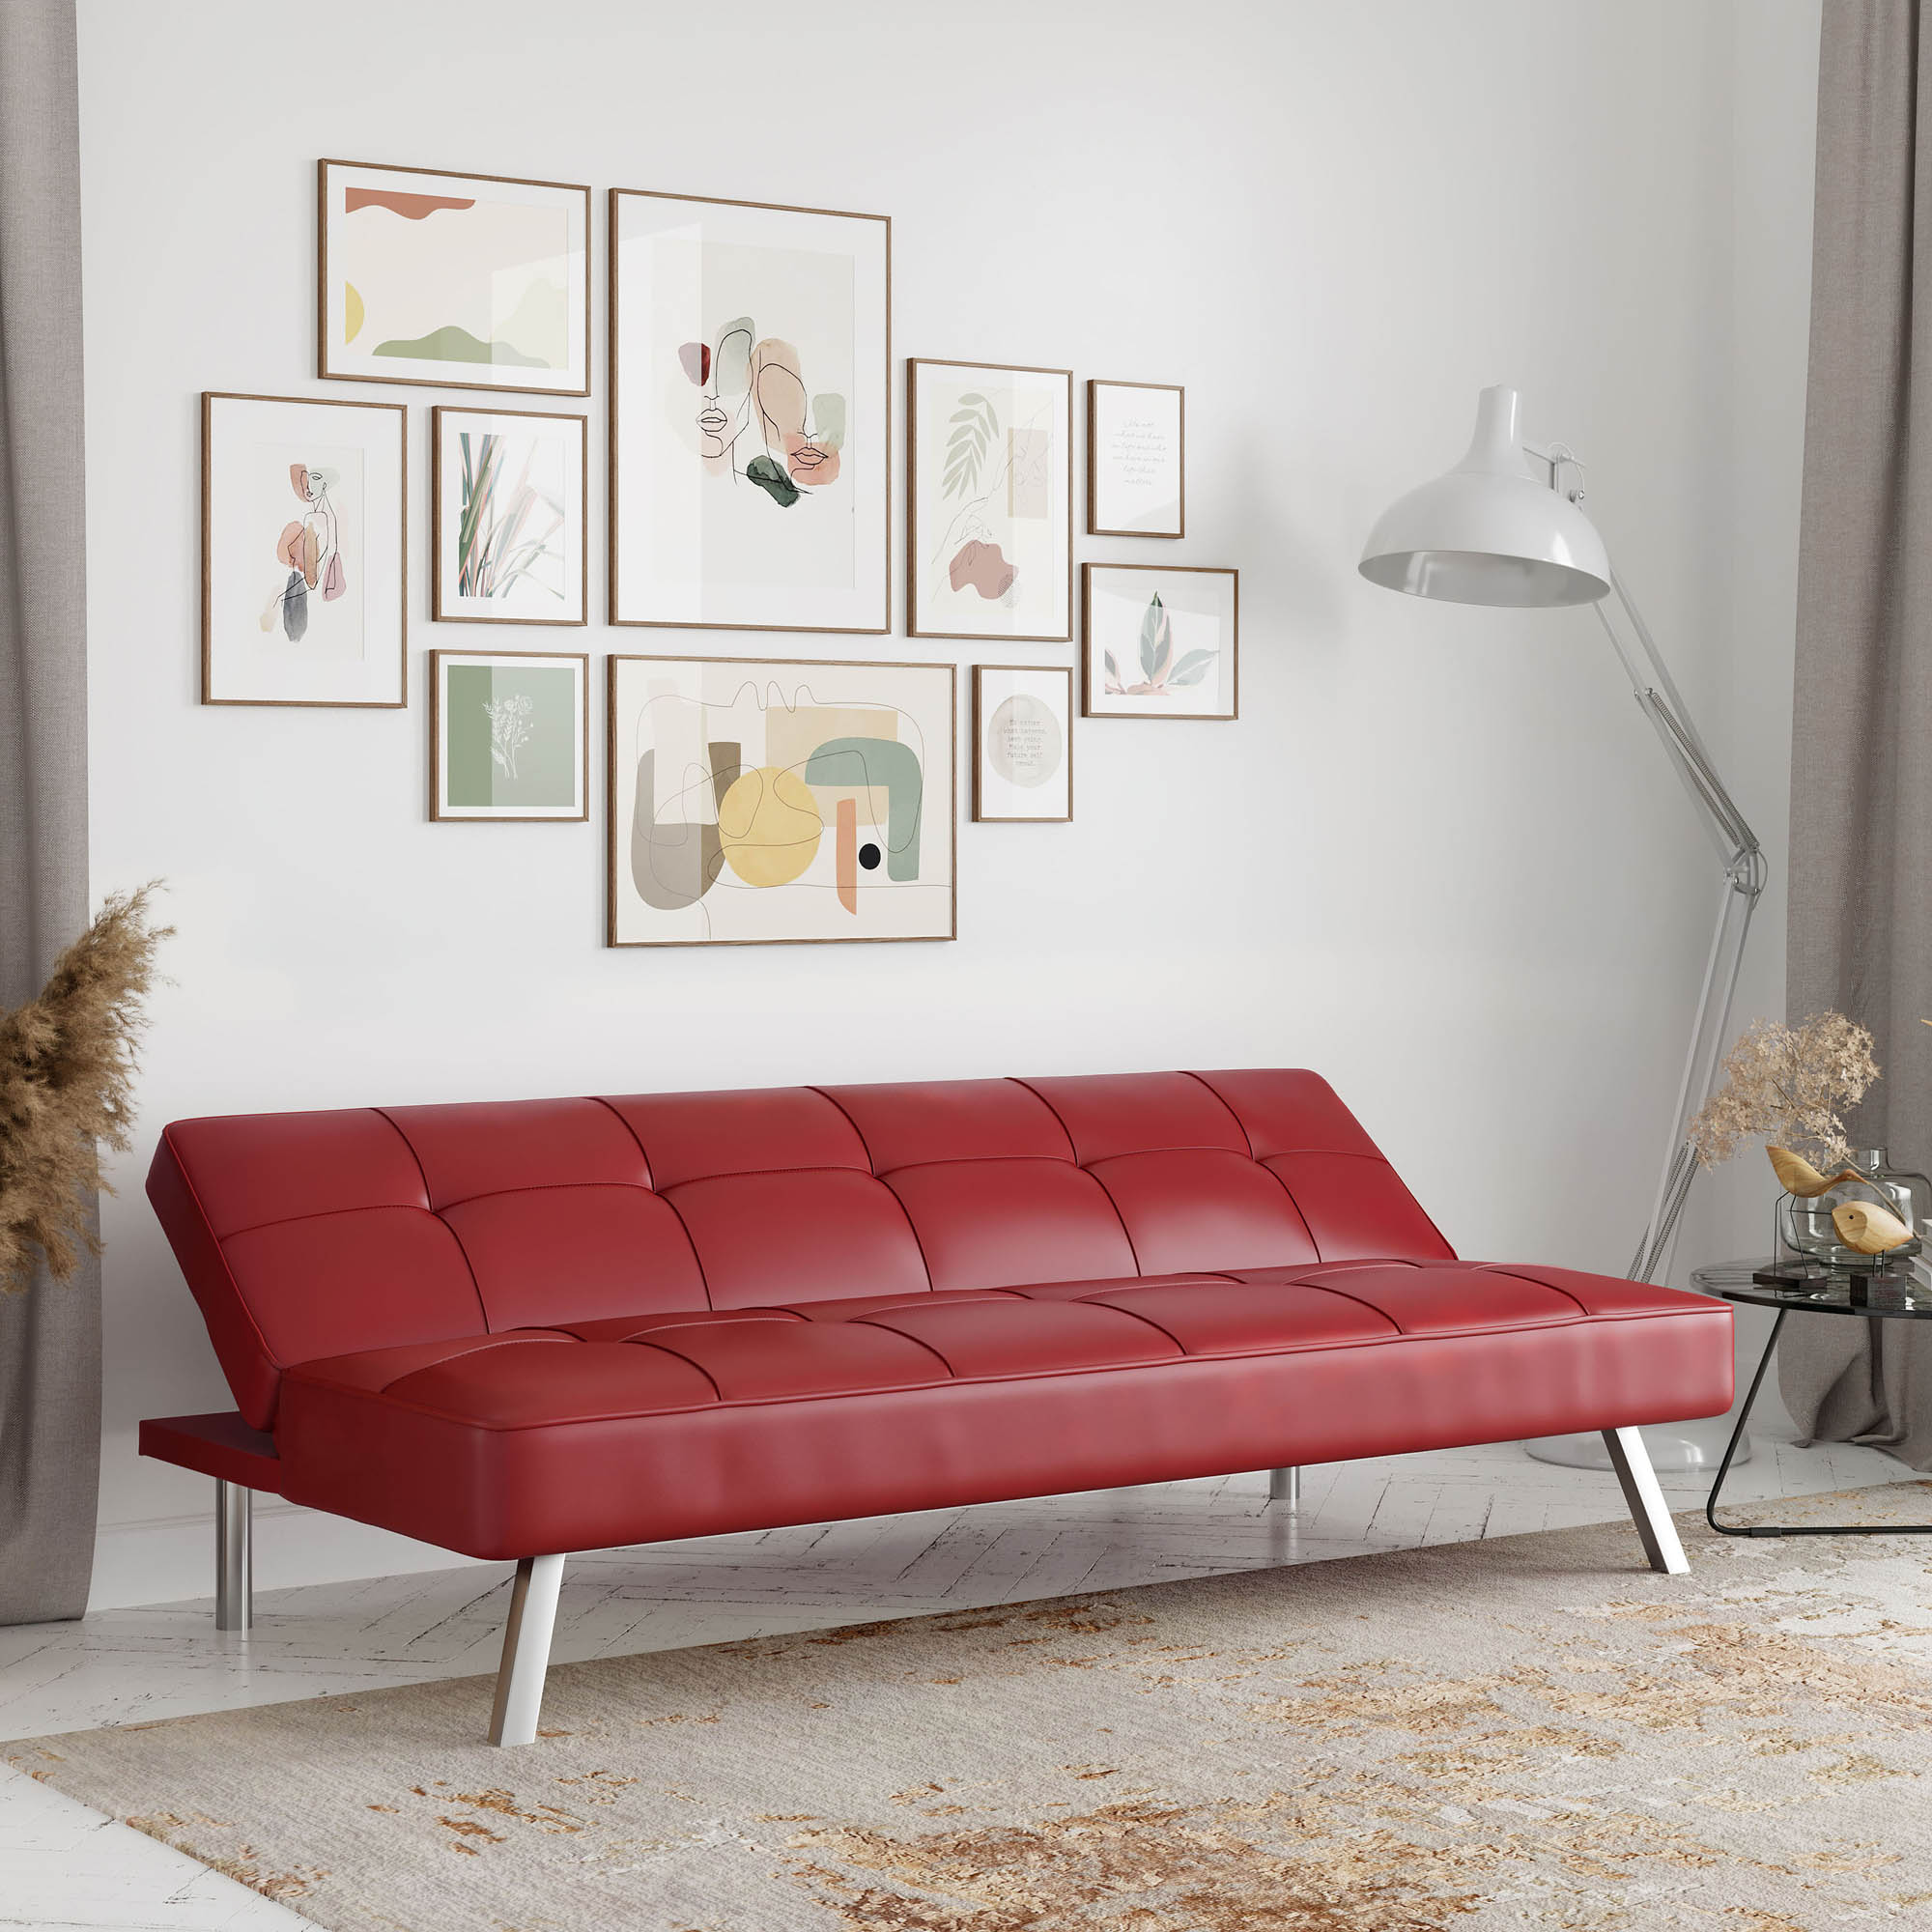 Serta Chelsea Modern Futon, Red Faux Leather - image 2 of 12